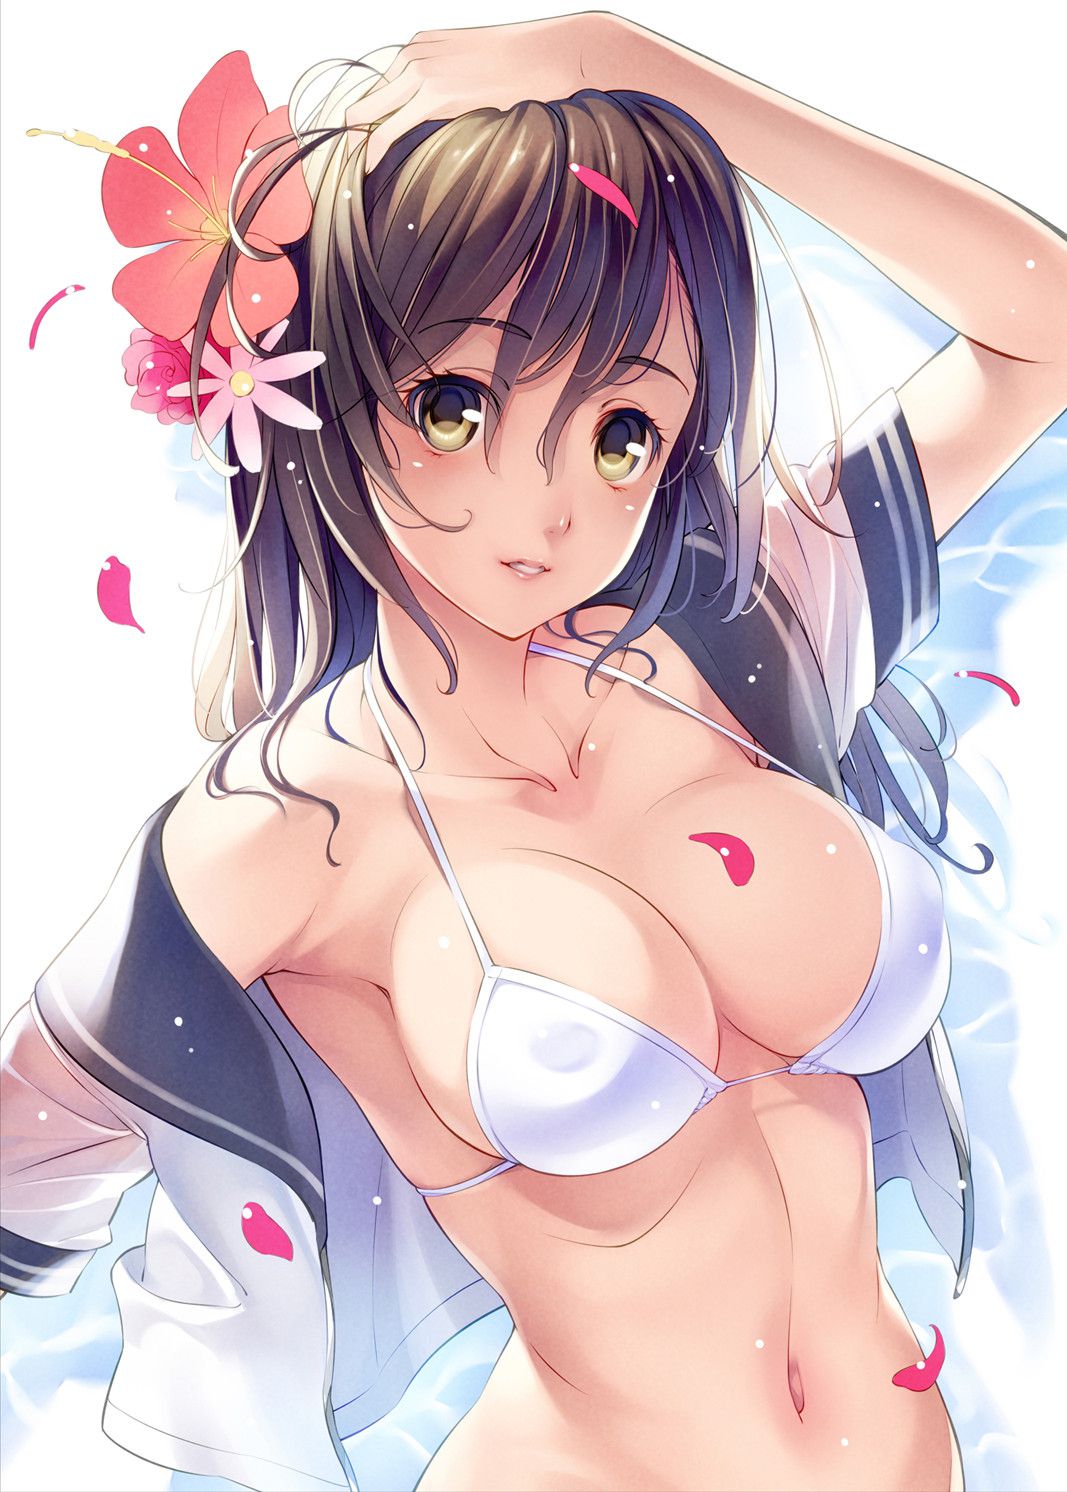 The swimsuit that wants to see the image of a swimsuit is lewd. That cloth area 18